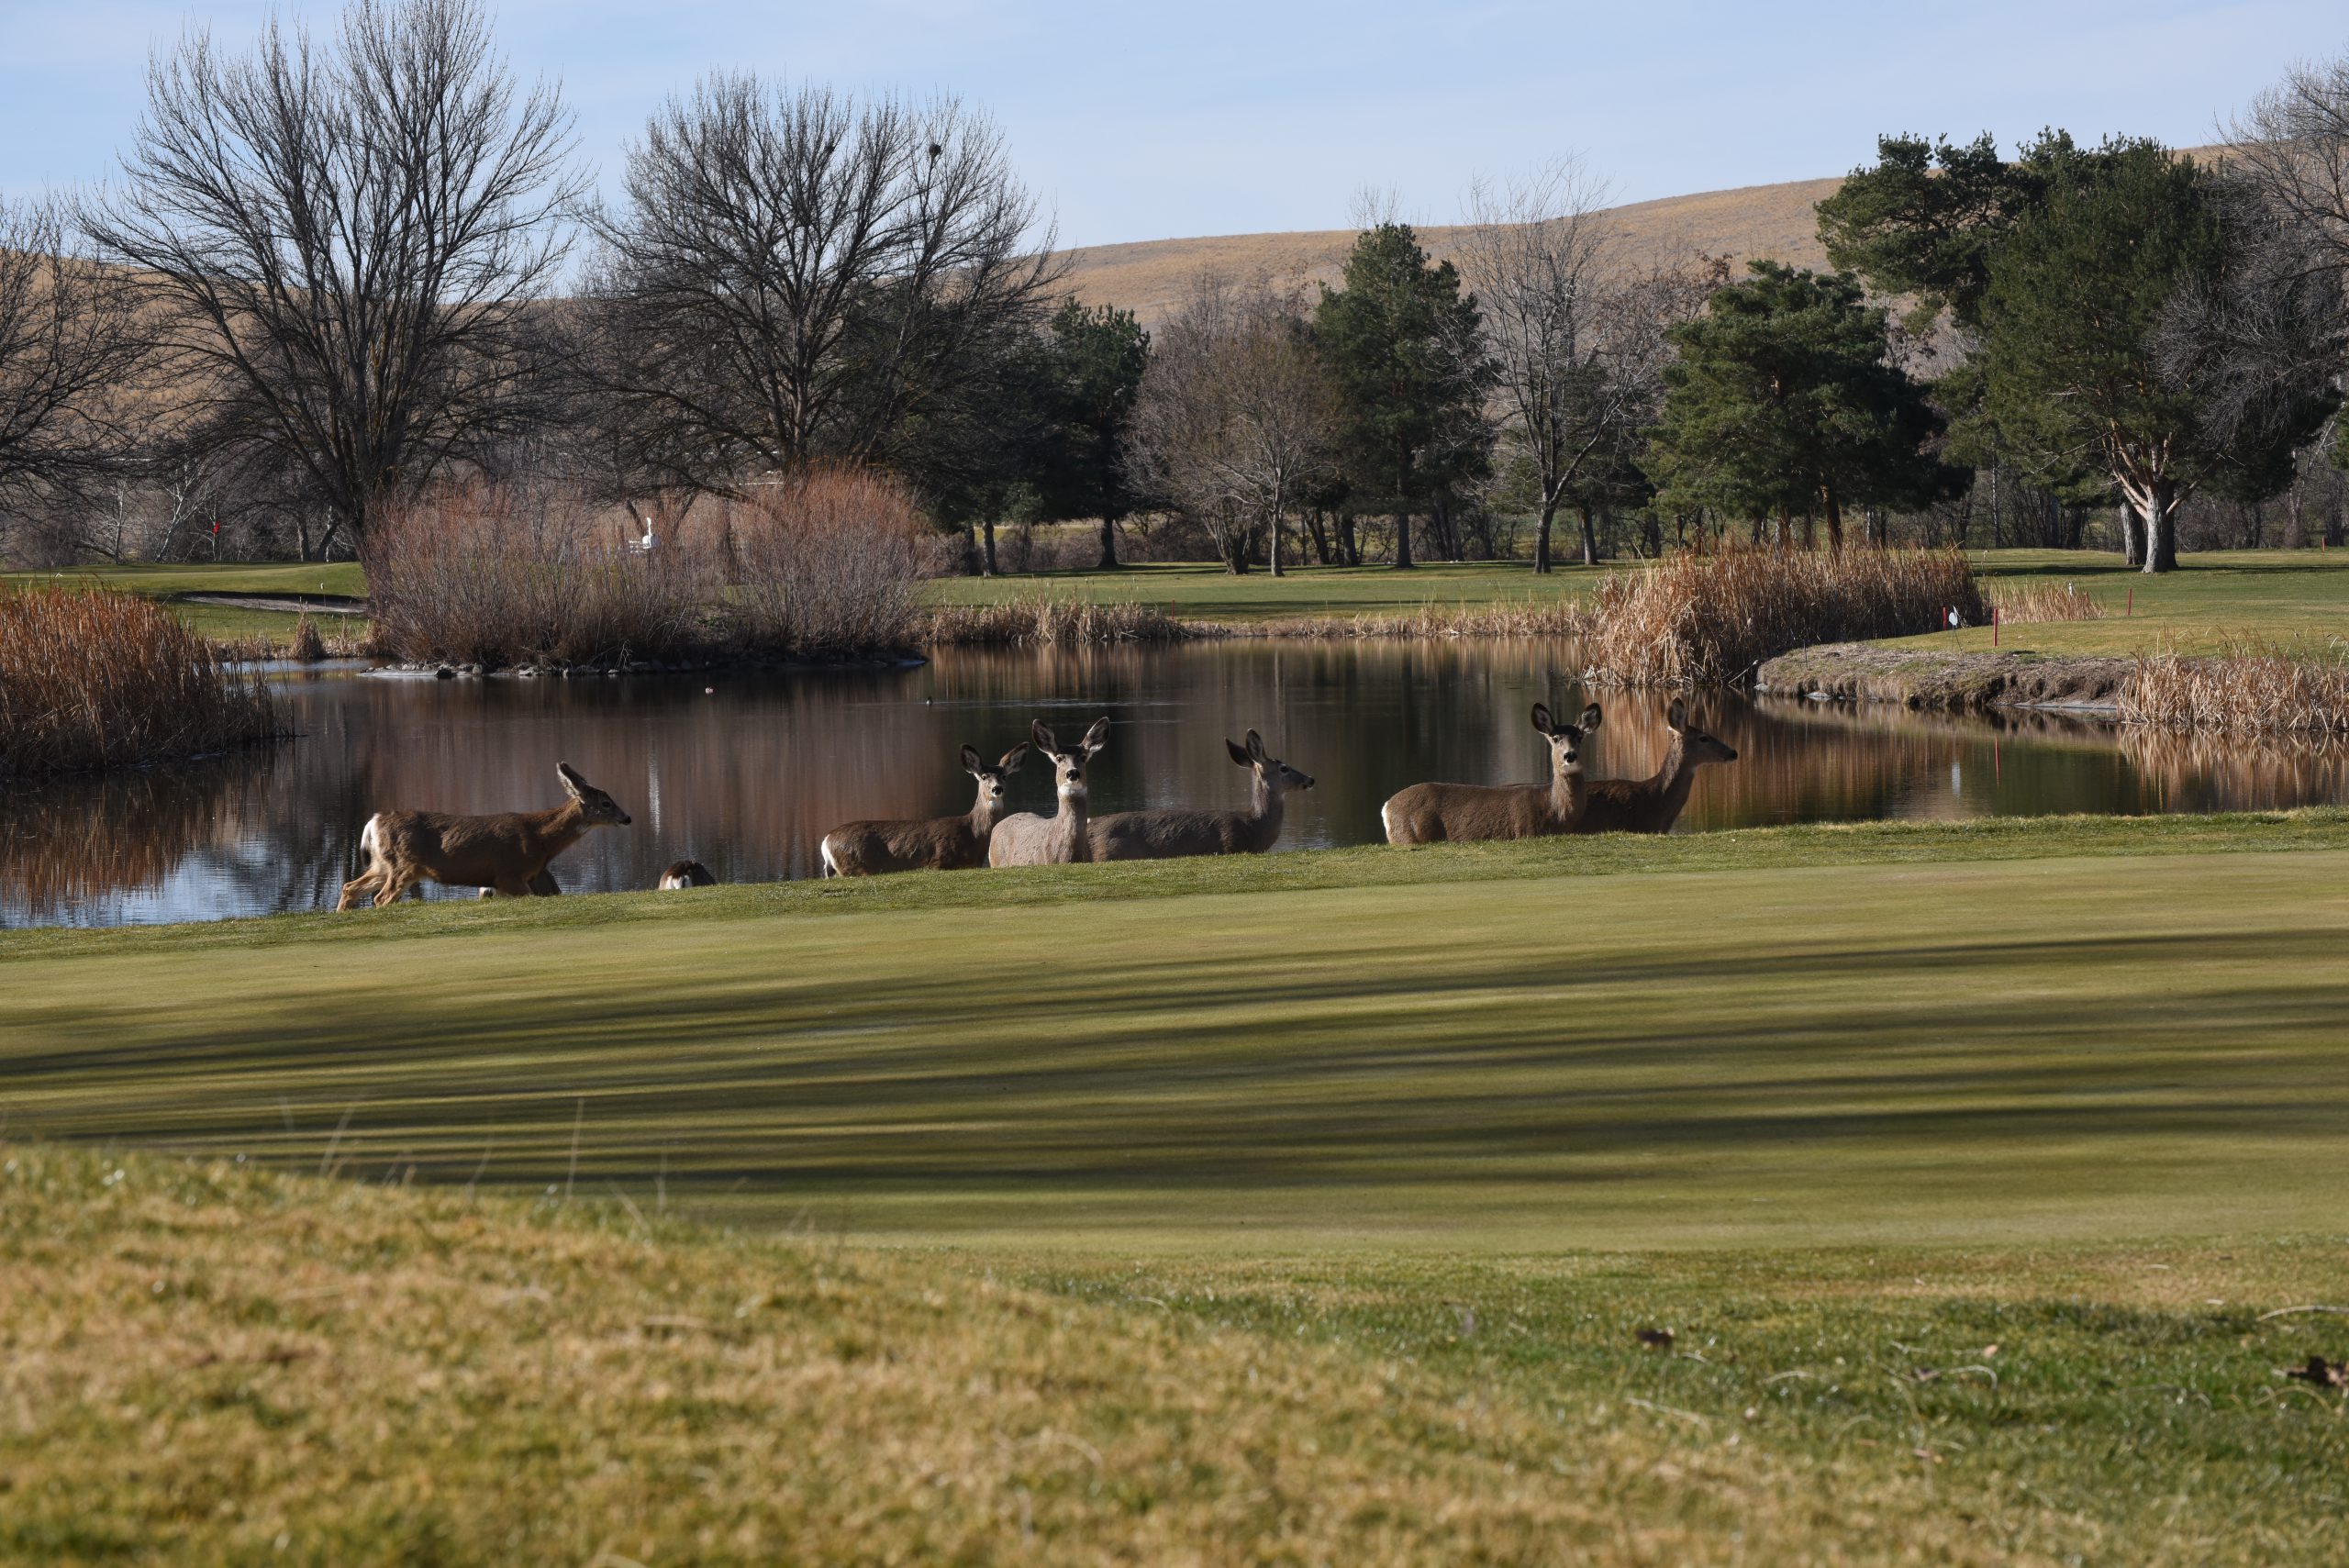 Part of a herd of 15 mule deer pause near a sand trap between the 14th green and a lake at Birch Creek Golf Course Feb. 28. The course was purchased last June by the Confederated Tribes of the Umatilla Indian Reservation. The golf course and clubhouse, including a restaurant, are being managed by Wildhorse Resort.